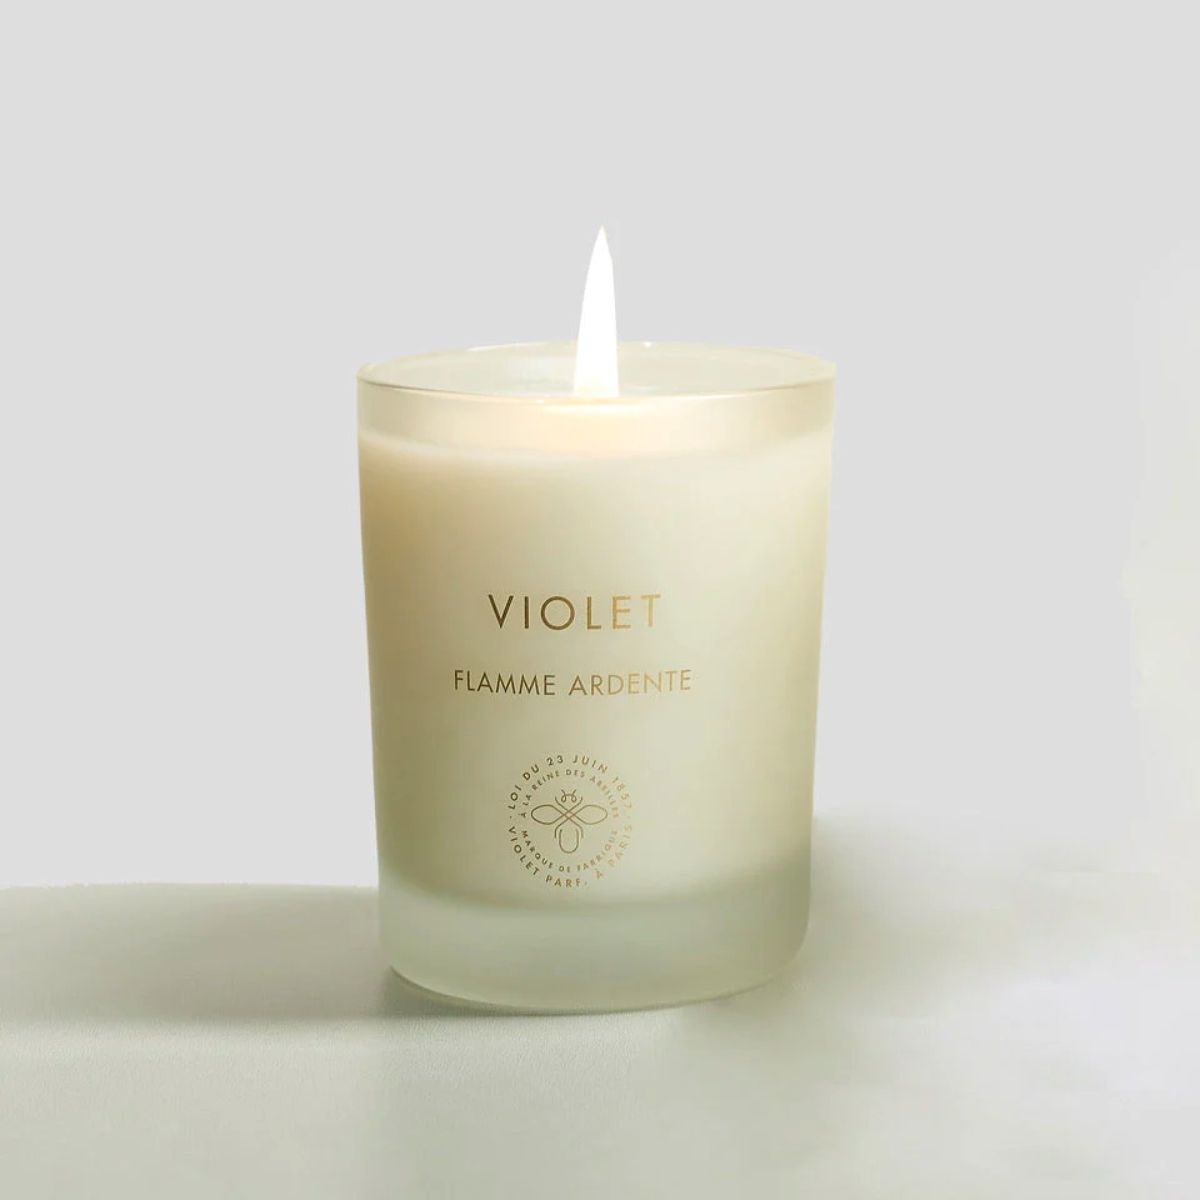 Violet - Flamme Ardente scented candle